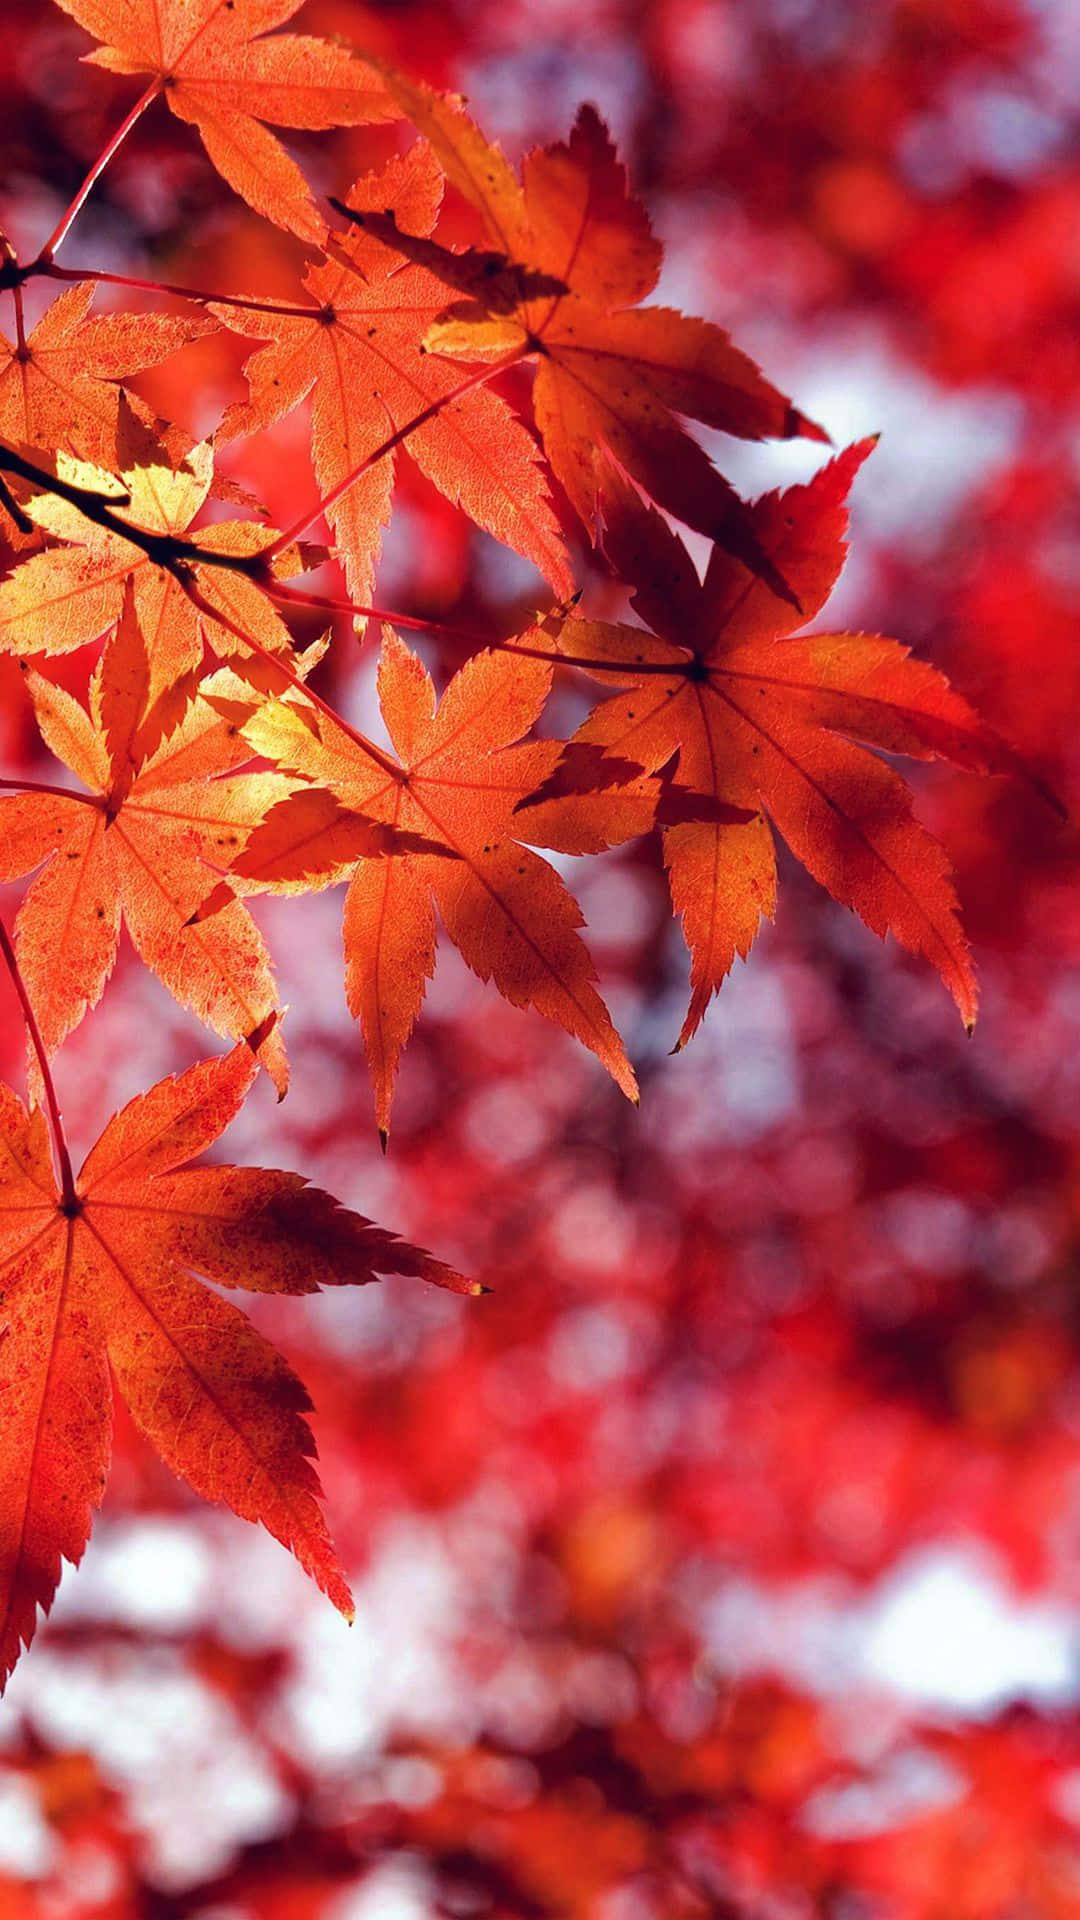 "Experience the Beauty of Fall on Your Screen" Wallpaper